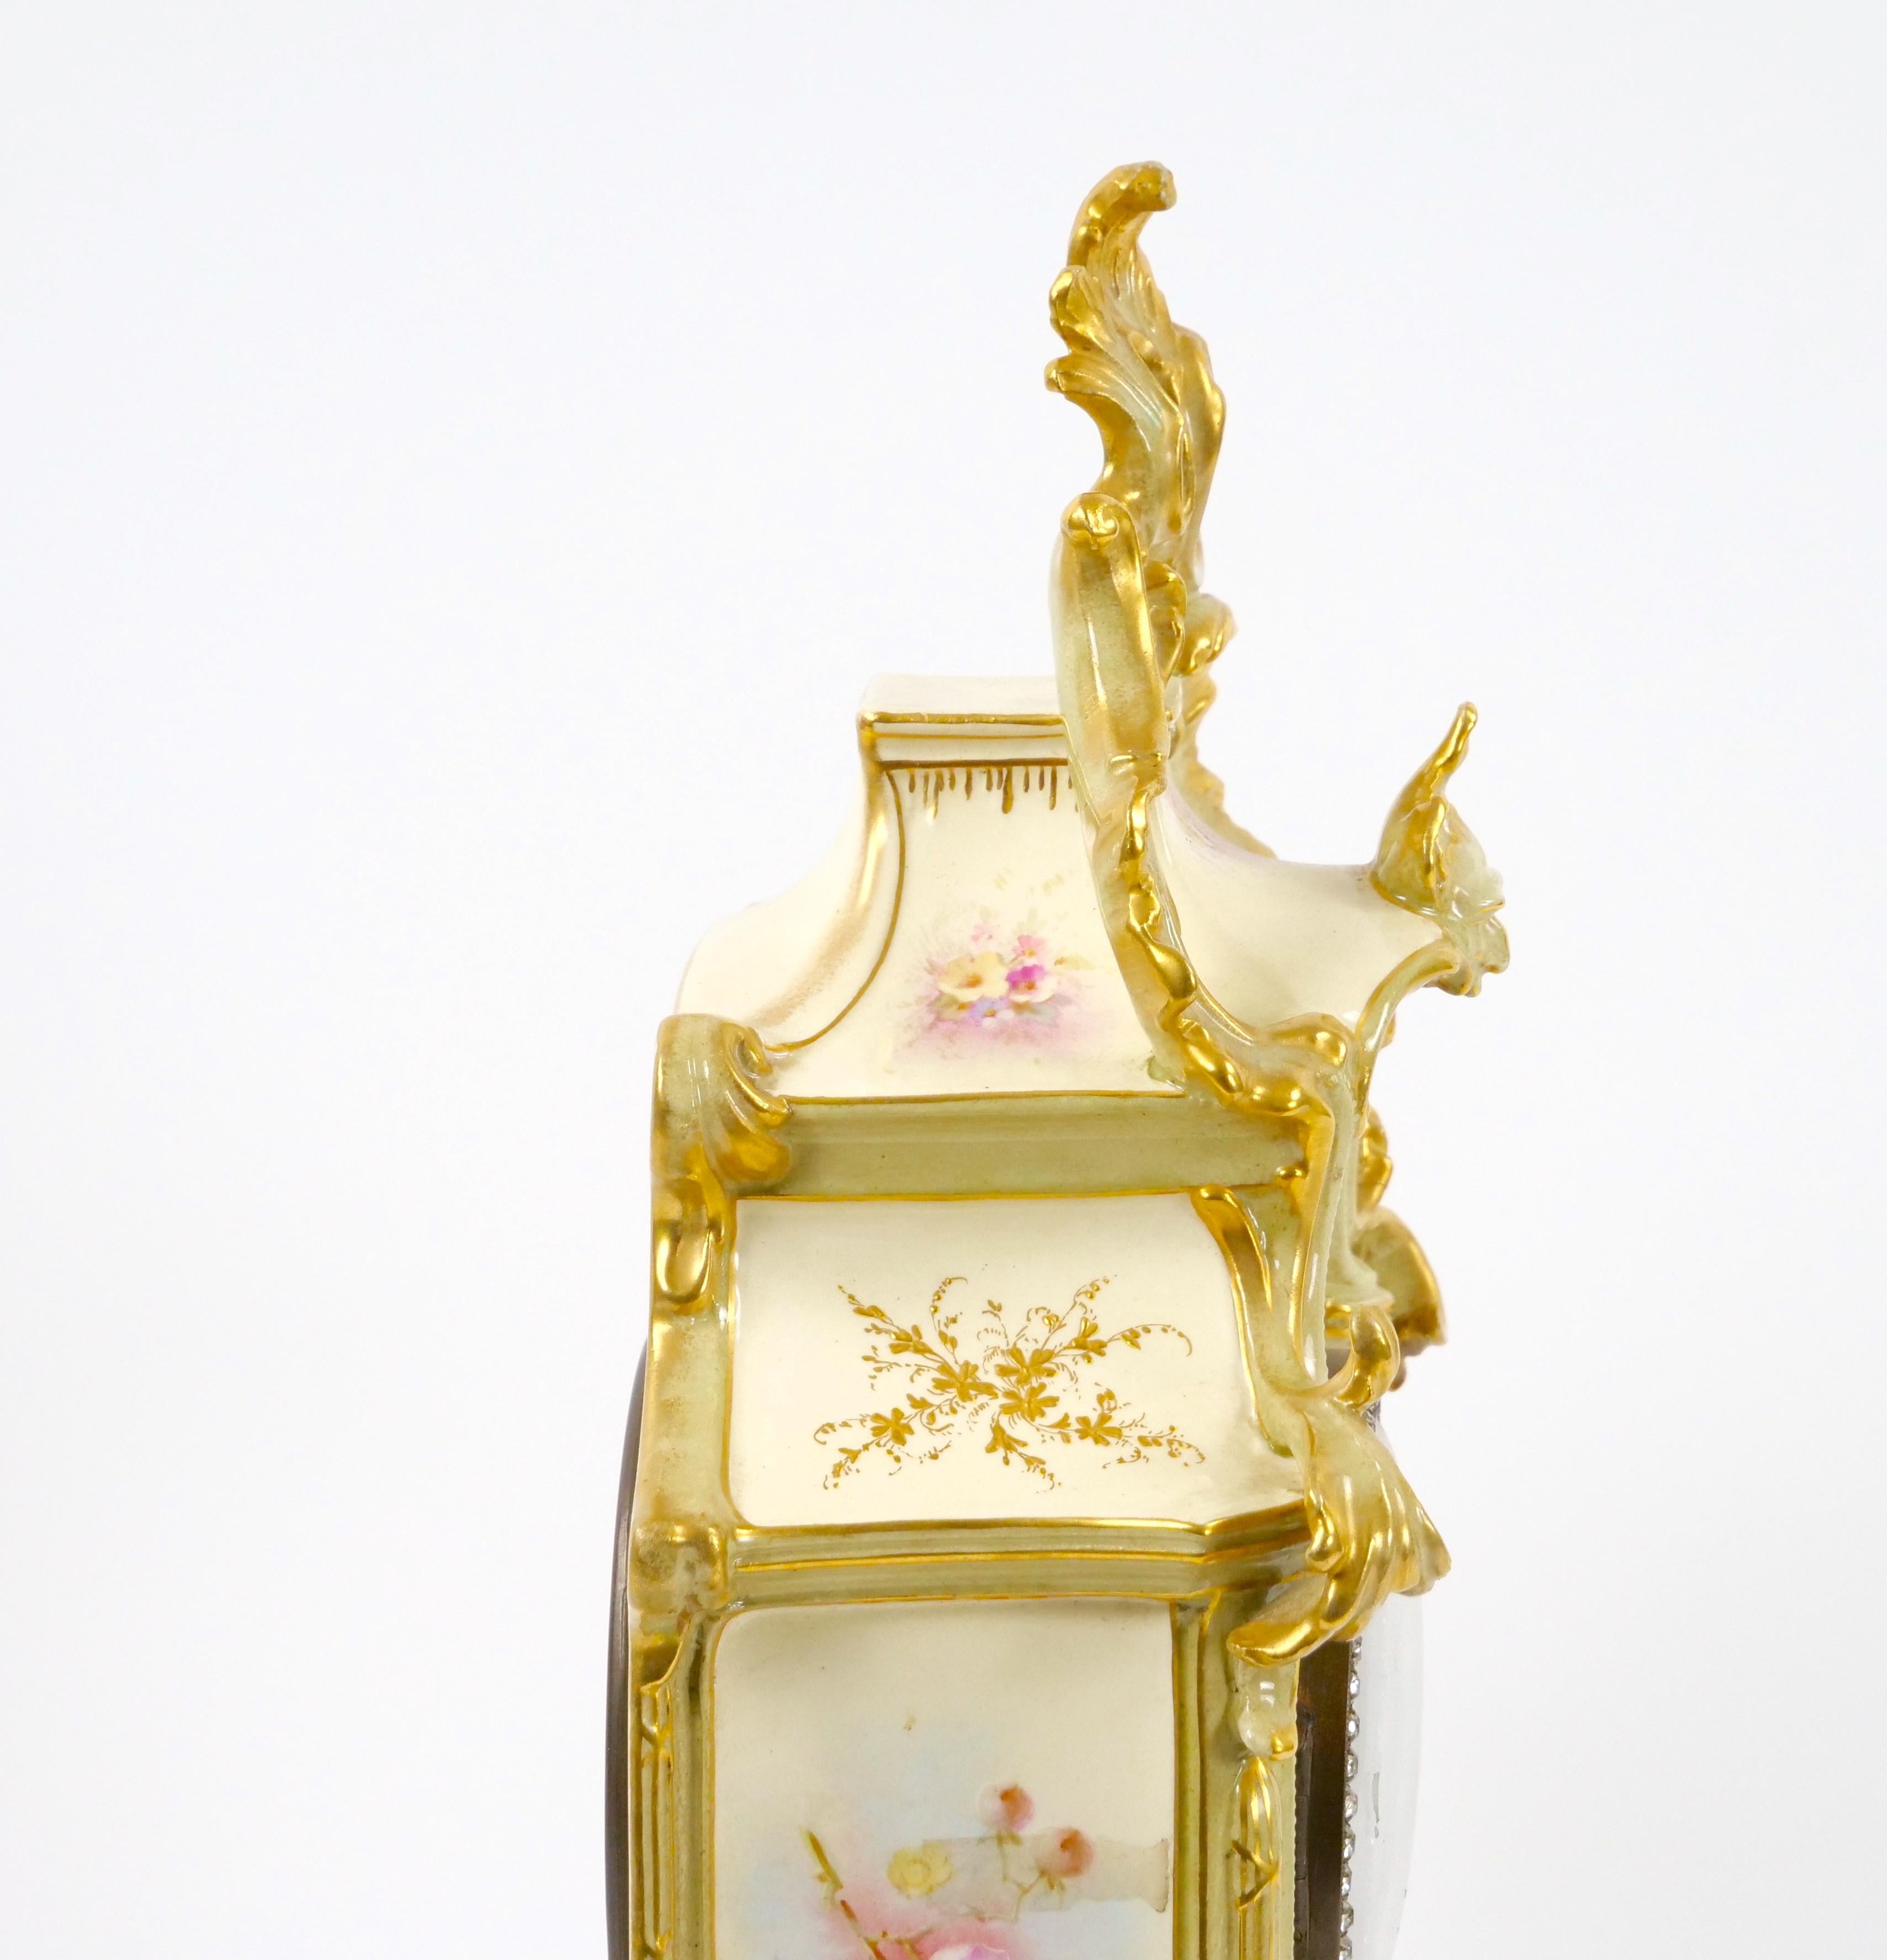 19th Century French Hand Painted/Gilt Decorated Porcelain Mantel Clock 7